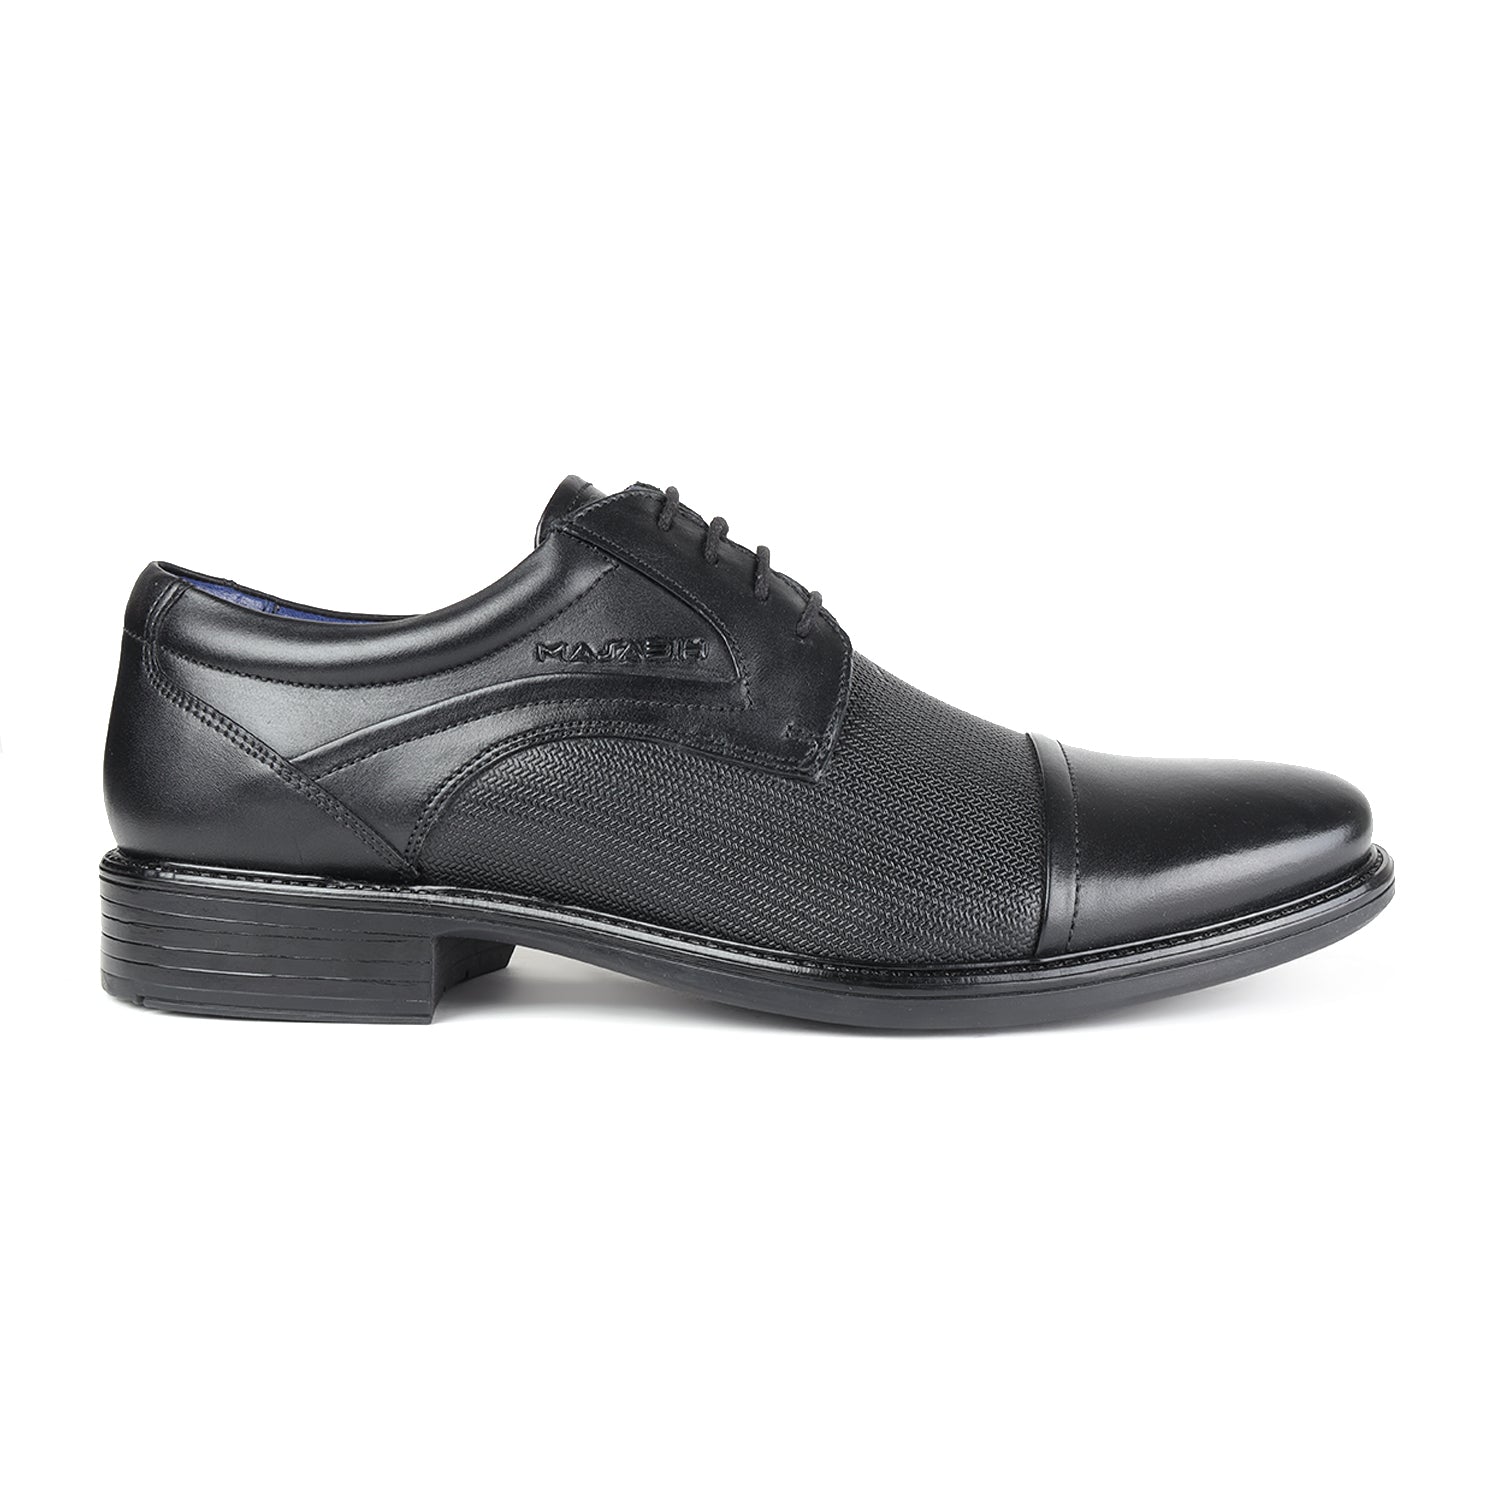 MASABIH GENUINE LEATHER BLACK DERBY LACEUP SHOES WITH TOE CAP FOR MEN